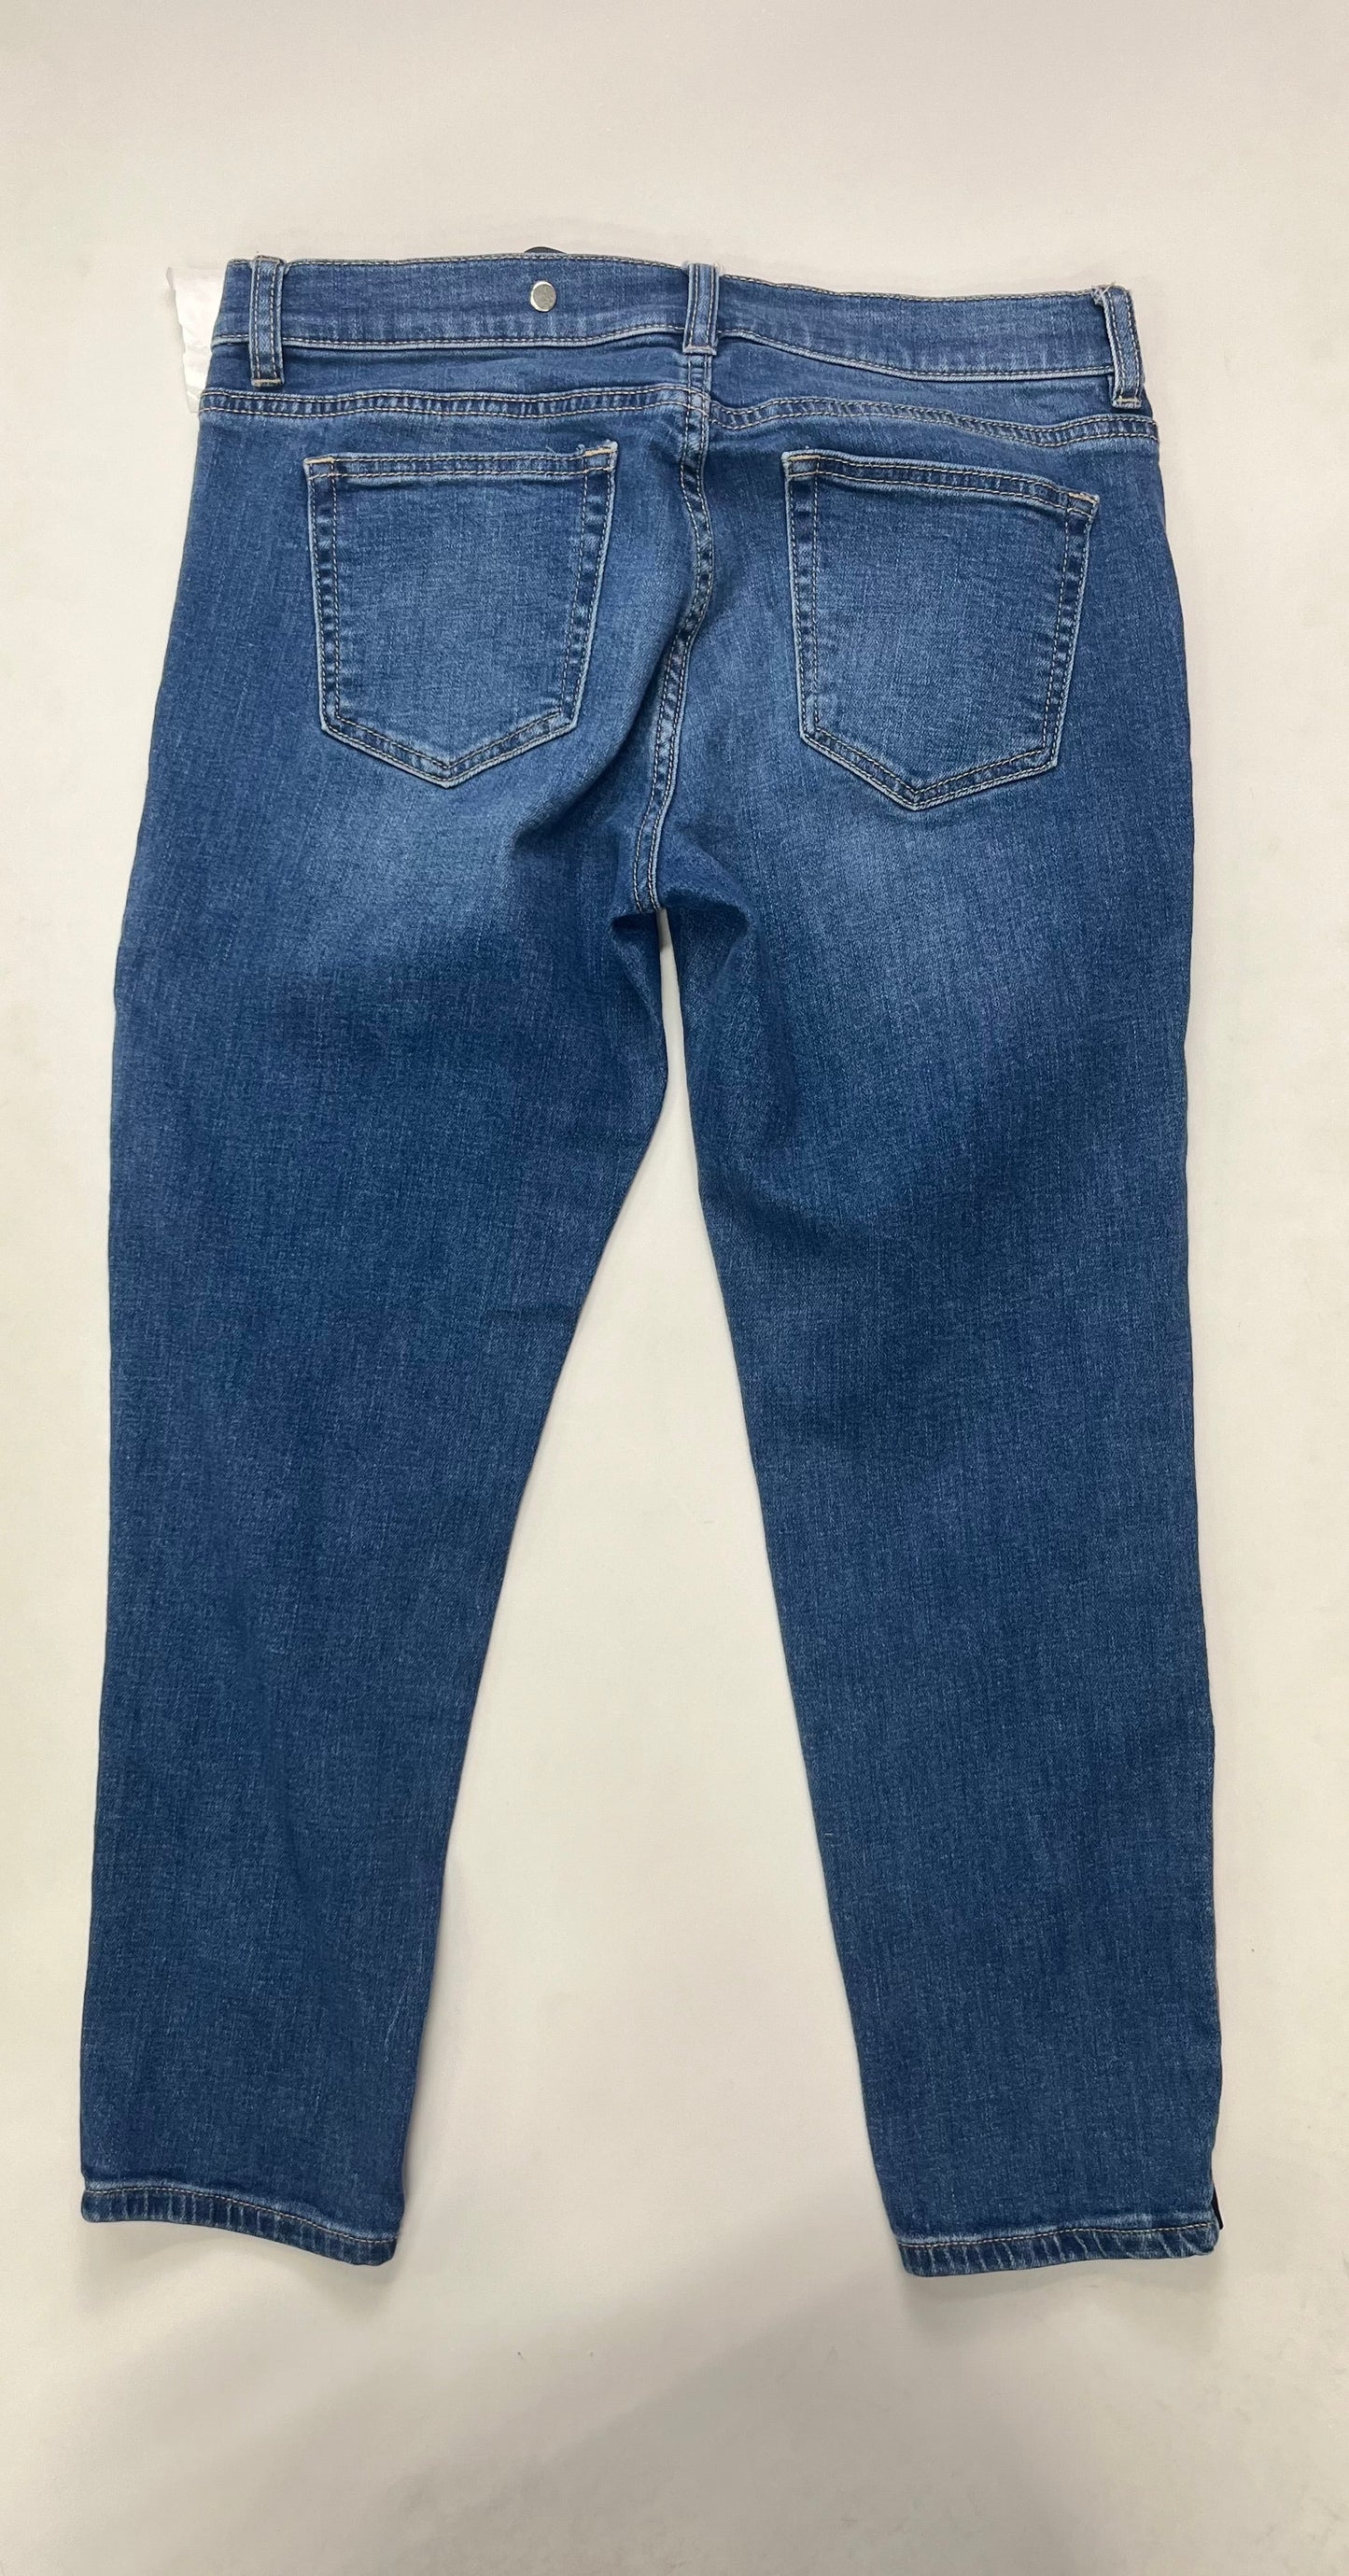 Denim Jeans New York And Co, Size 6